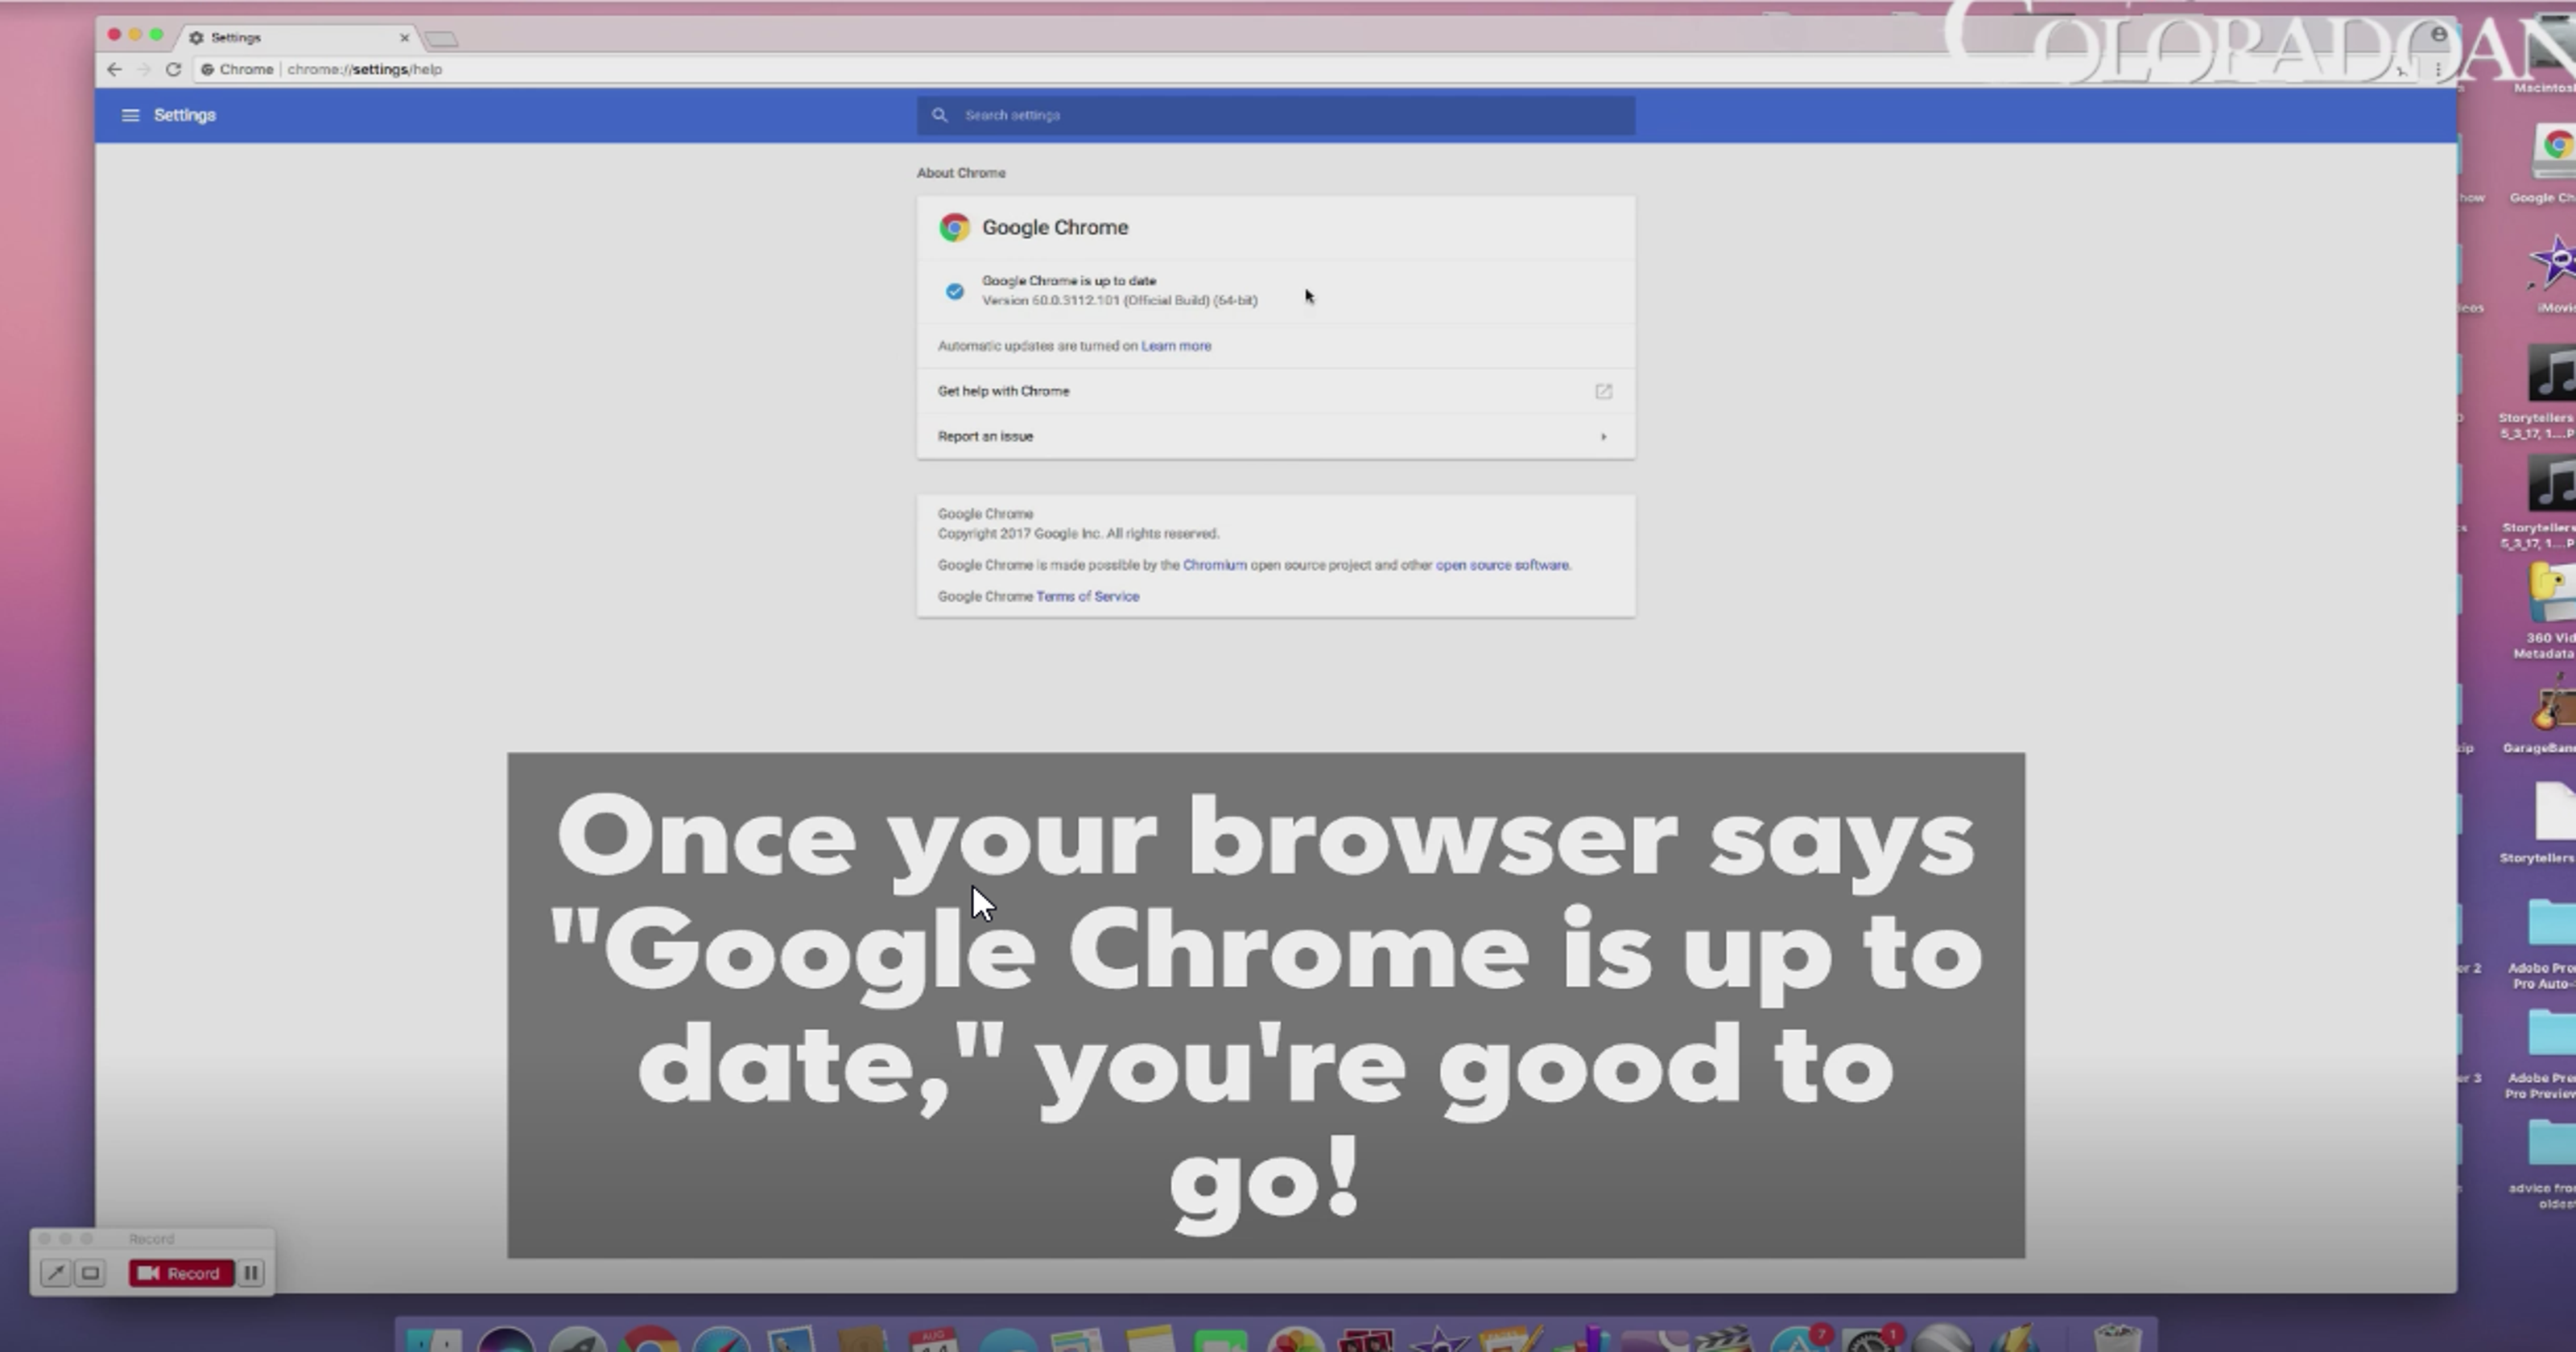 How to update Google Chrome to the latest version